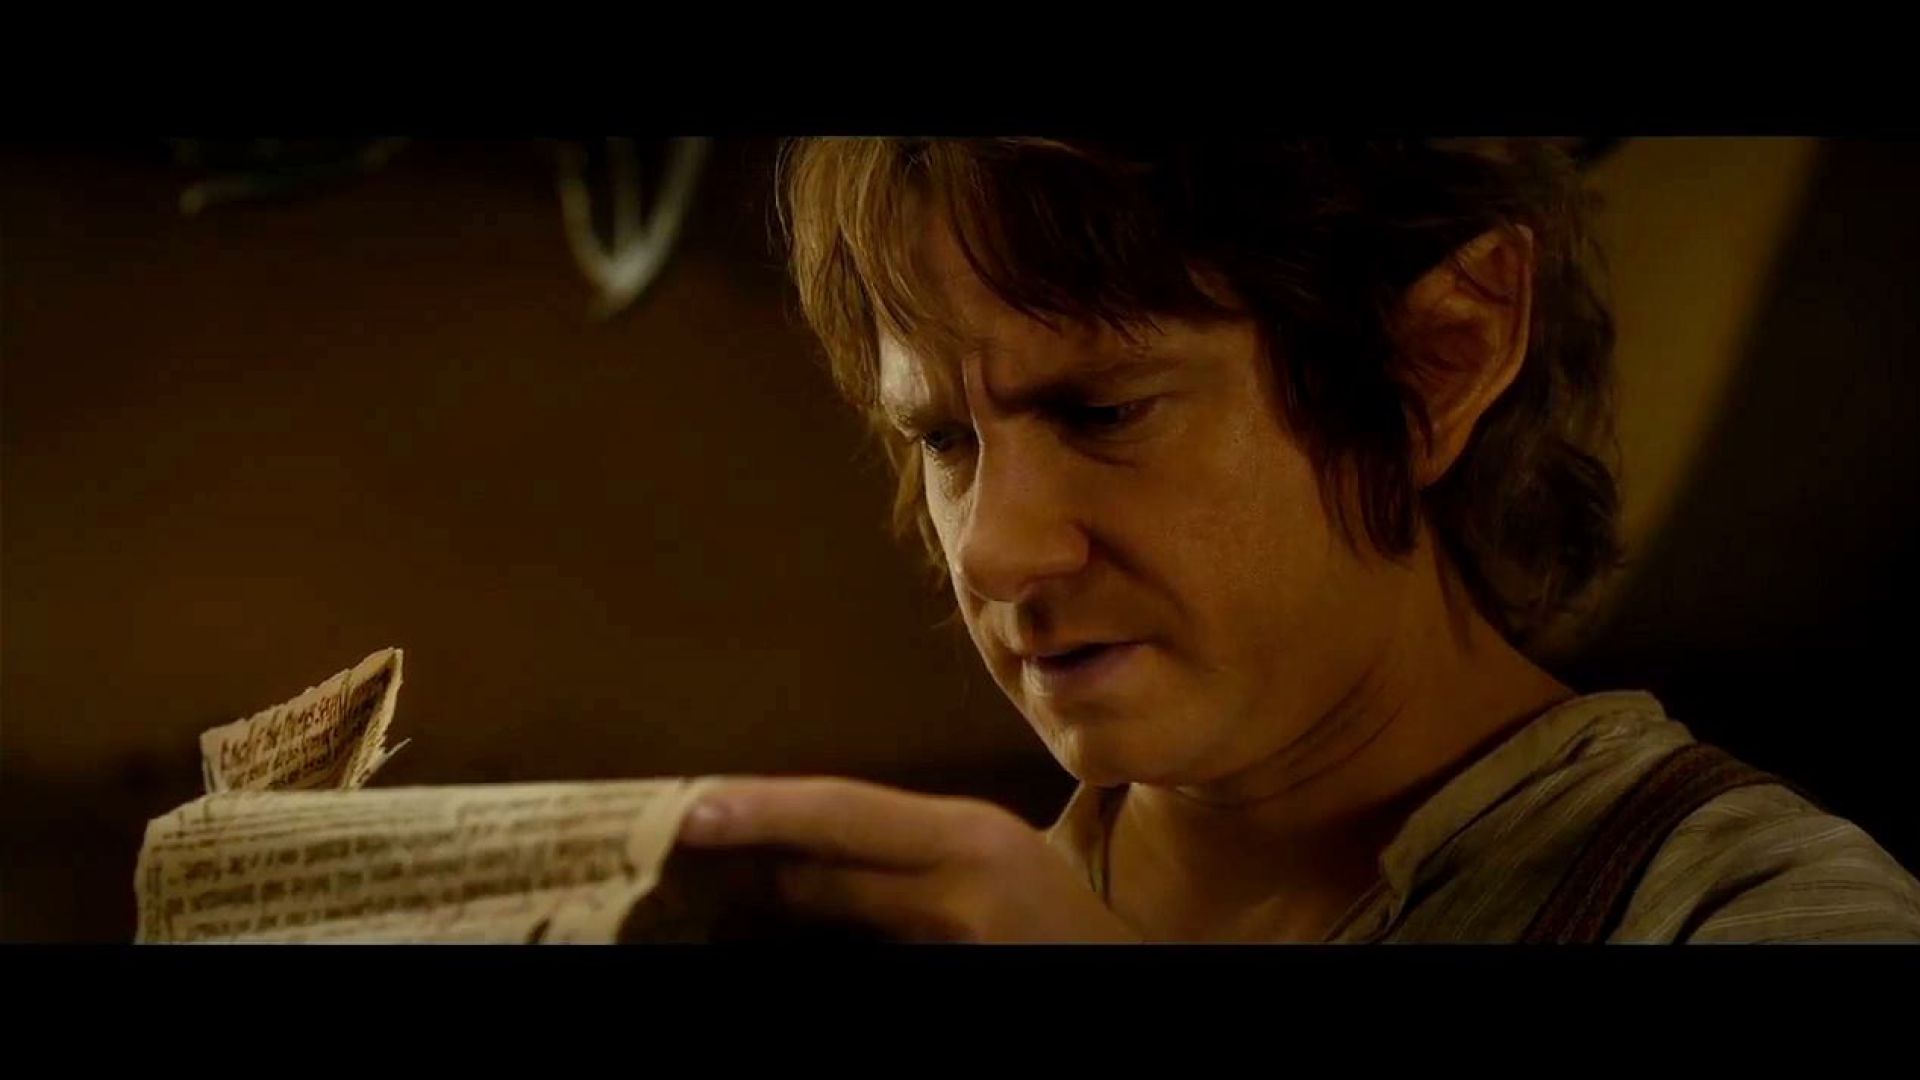 Bilbo faints after reading his contract in The Hobbit: An Unexpected Journey